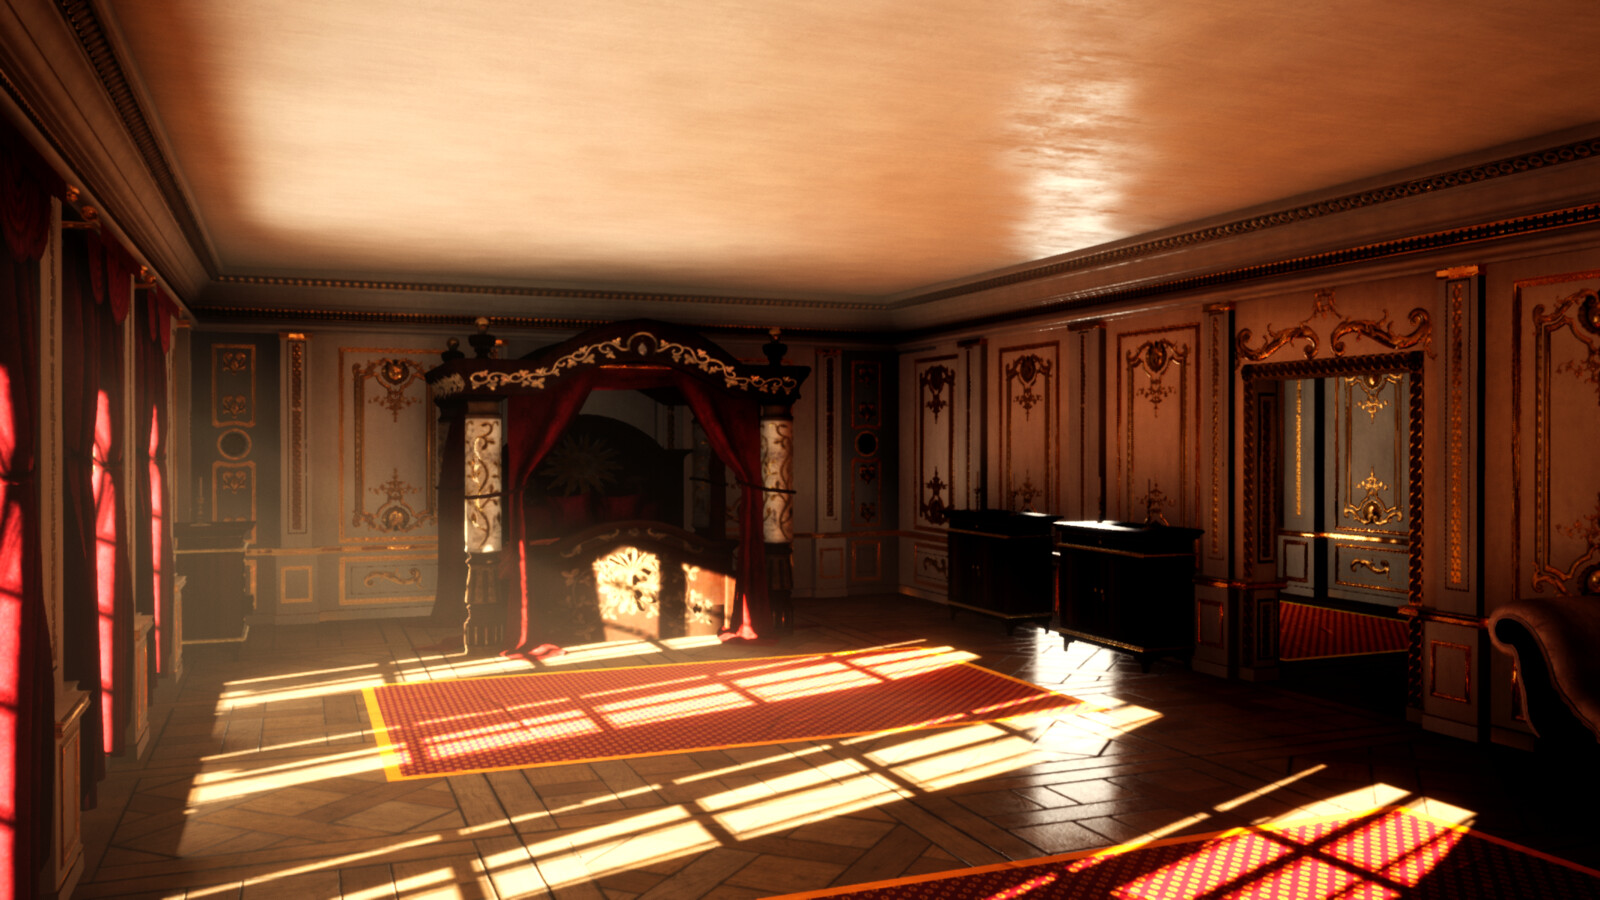 I know Thief usually takes place at night, but I wanted to do a few renders in daylight to emphasize the warm colors I used in my textures. Rendered in UE4.